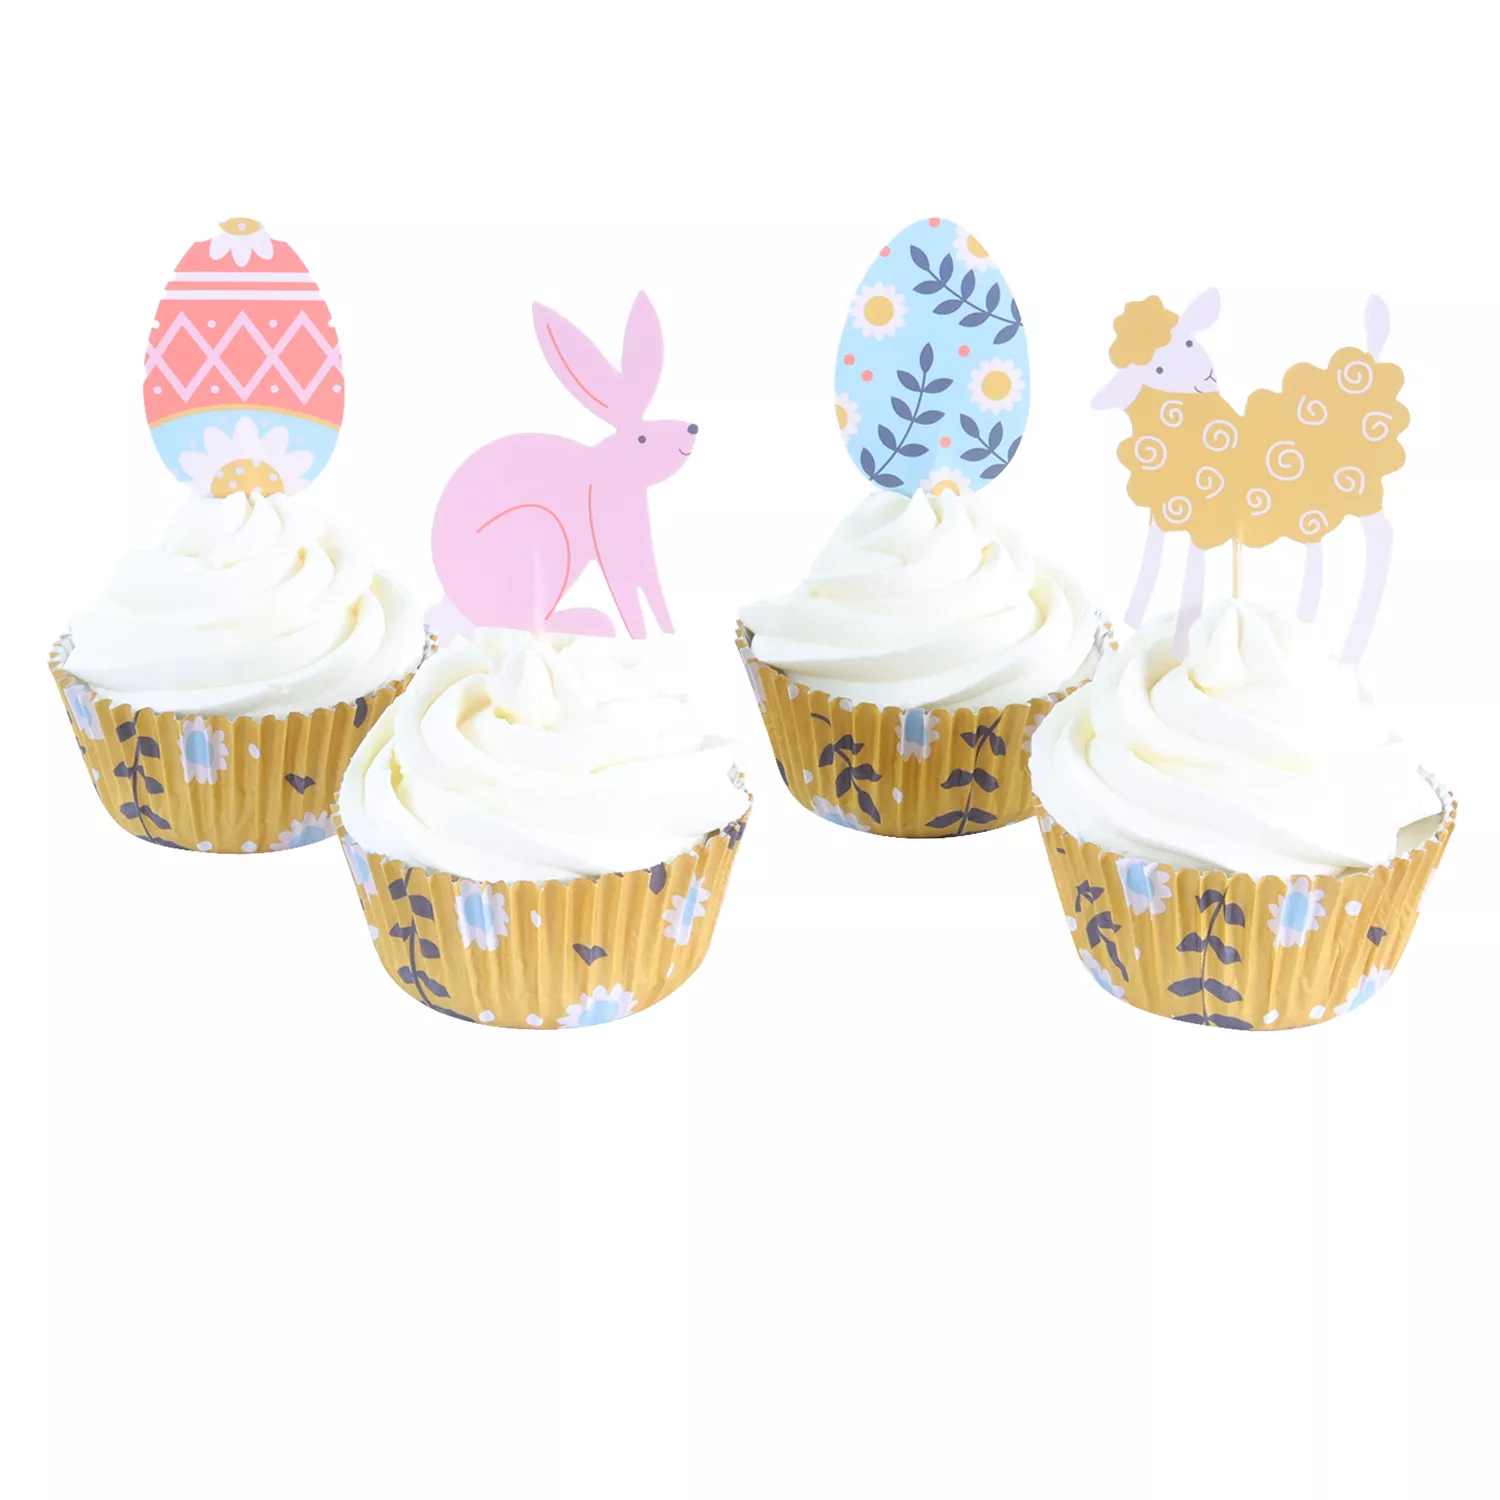 PME Happy Easter Cupcake Liners & Toppers, Set of 24